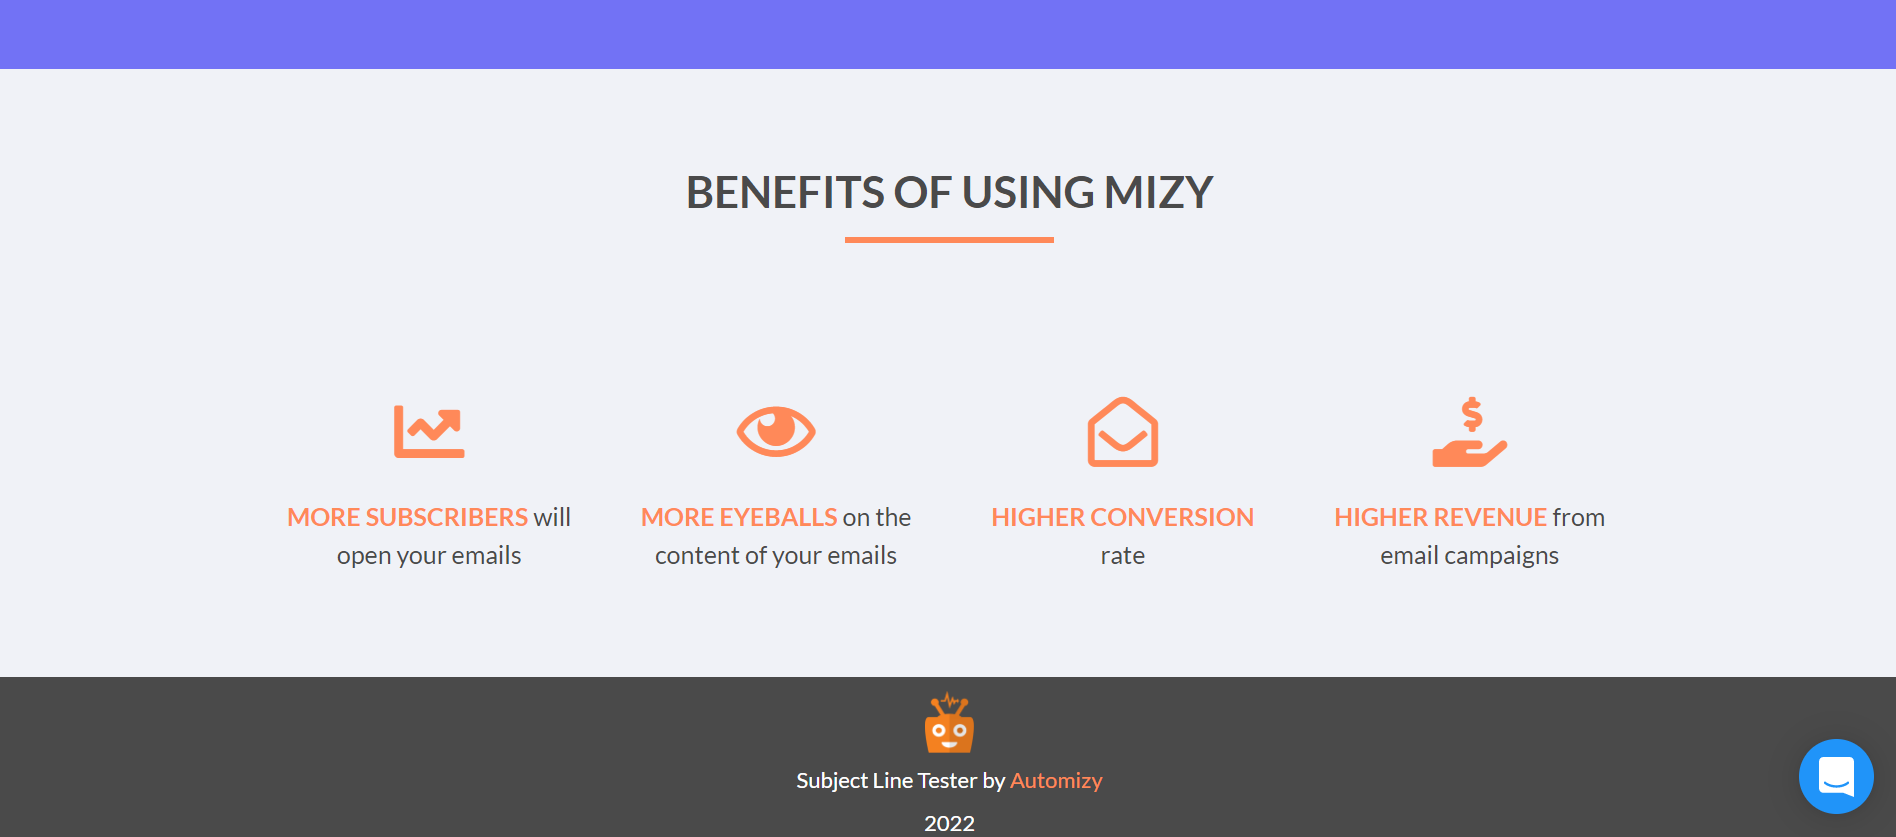 Mizy's deep learning neural network